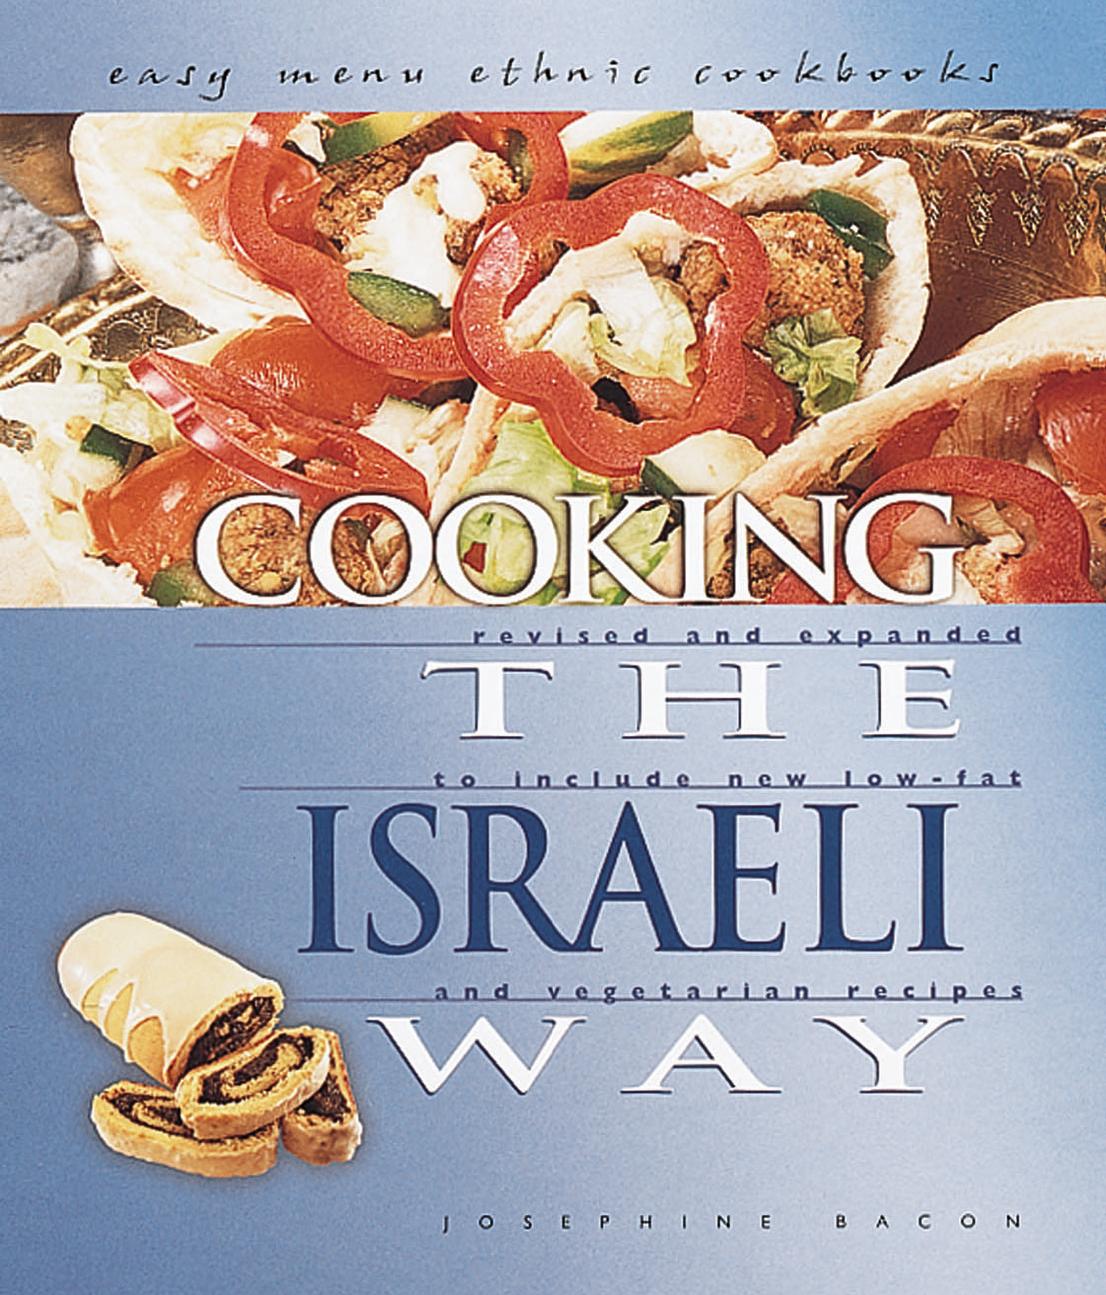 Cooking the Israeli Way by Josephine Bacon